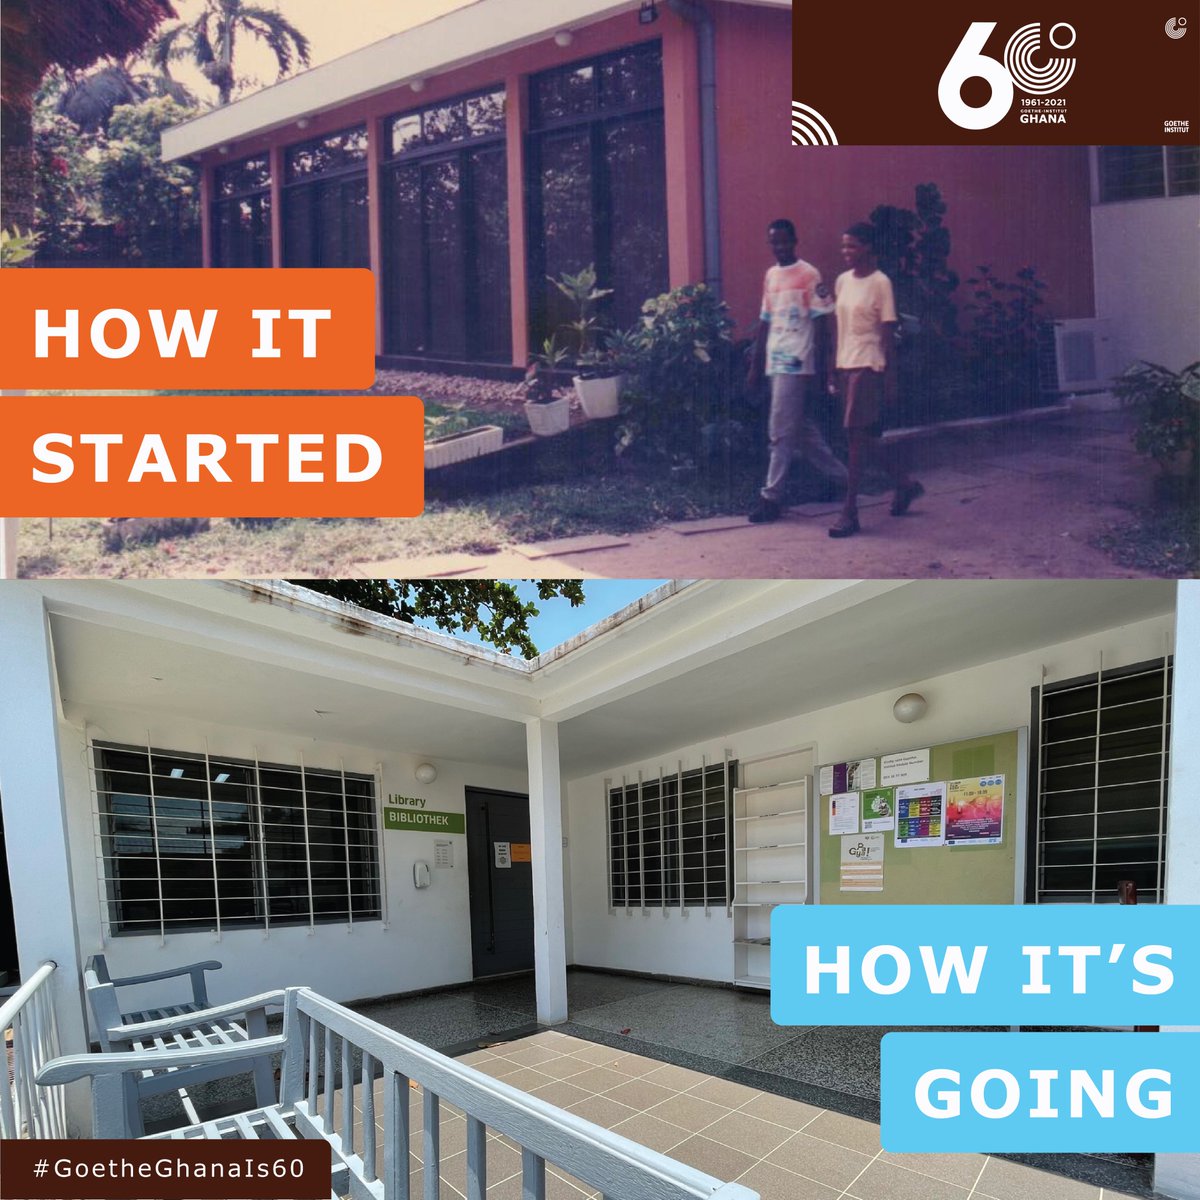 How It Started vs How It’s Going. 

A Picture of the Goethe-Institut Ghana Library (Exterior), back then vs How it looks now 🤩
#GoetheGhanaIs60
___
#goetheinstitutghana #goetheghana #german #deutsch #GoetheLibrary